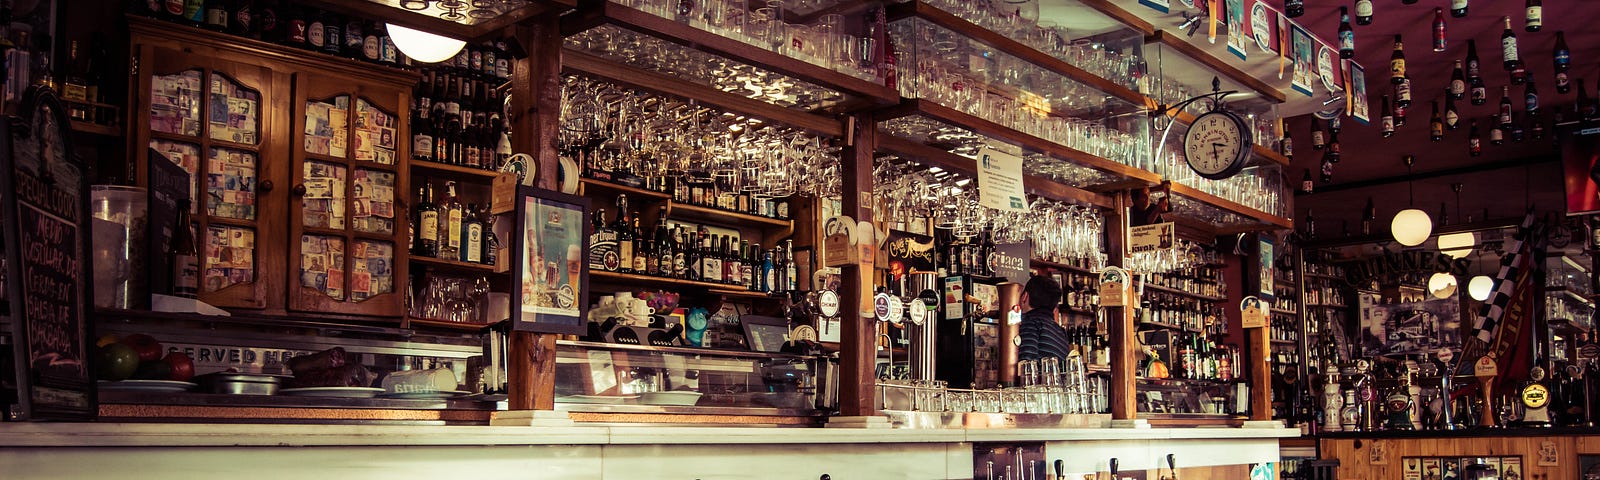 A picture of an old, wooden bar with an ornate back bar.